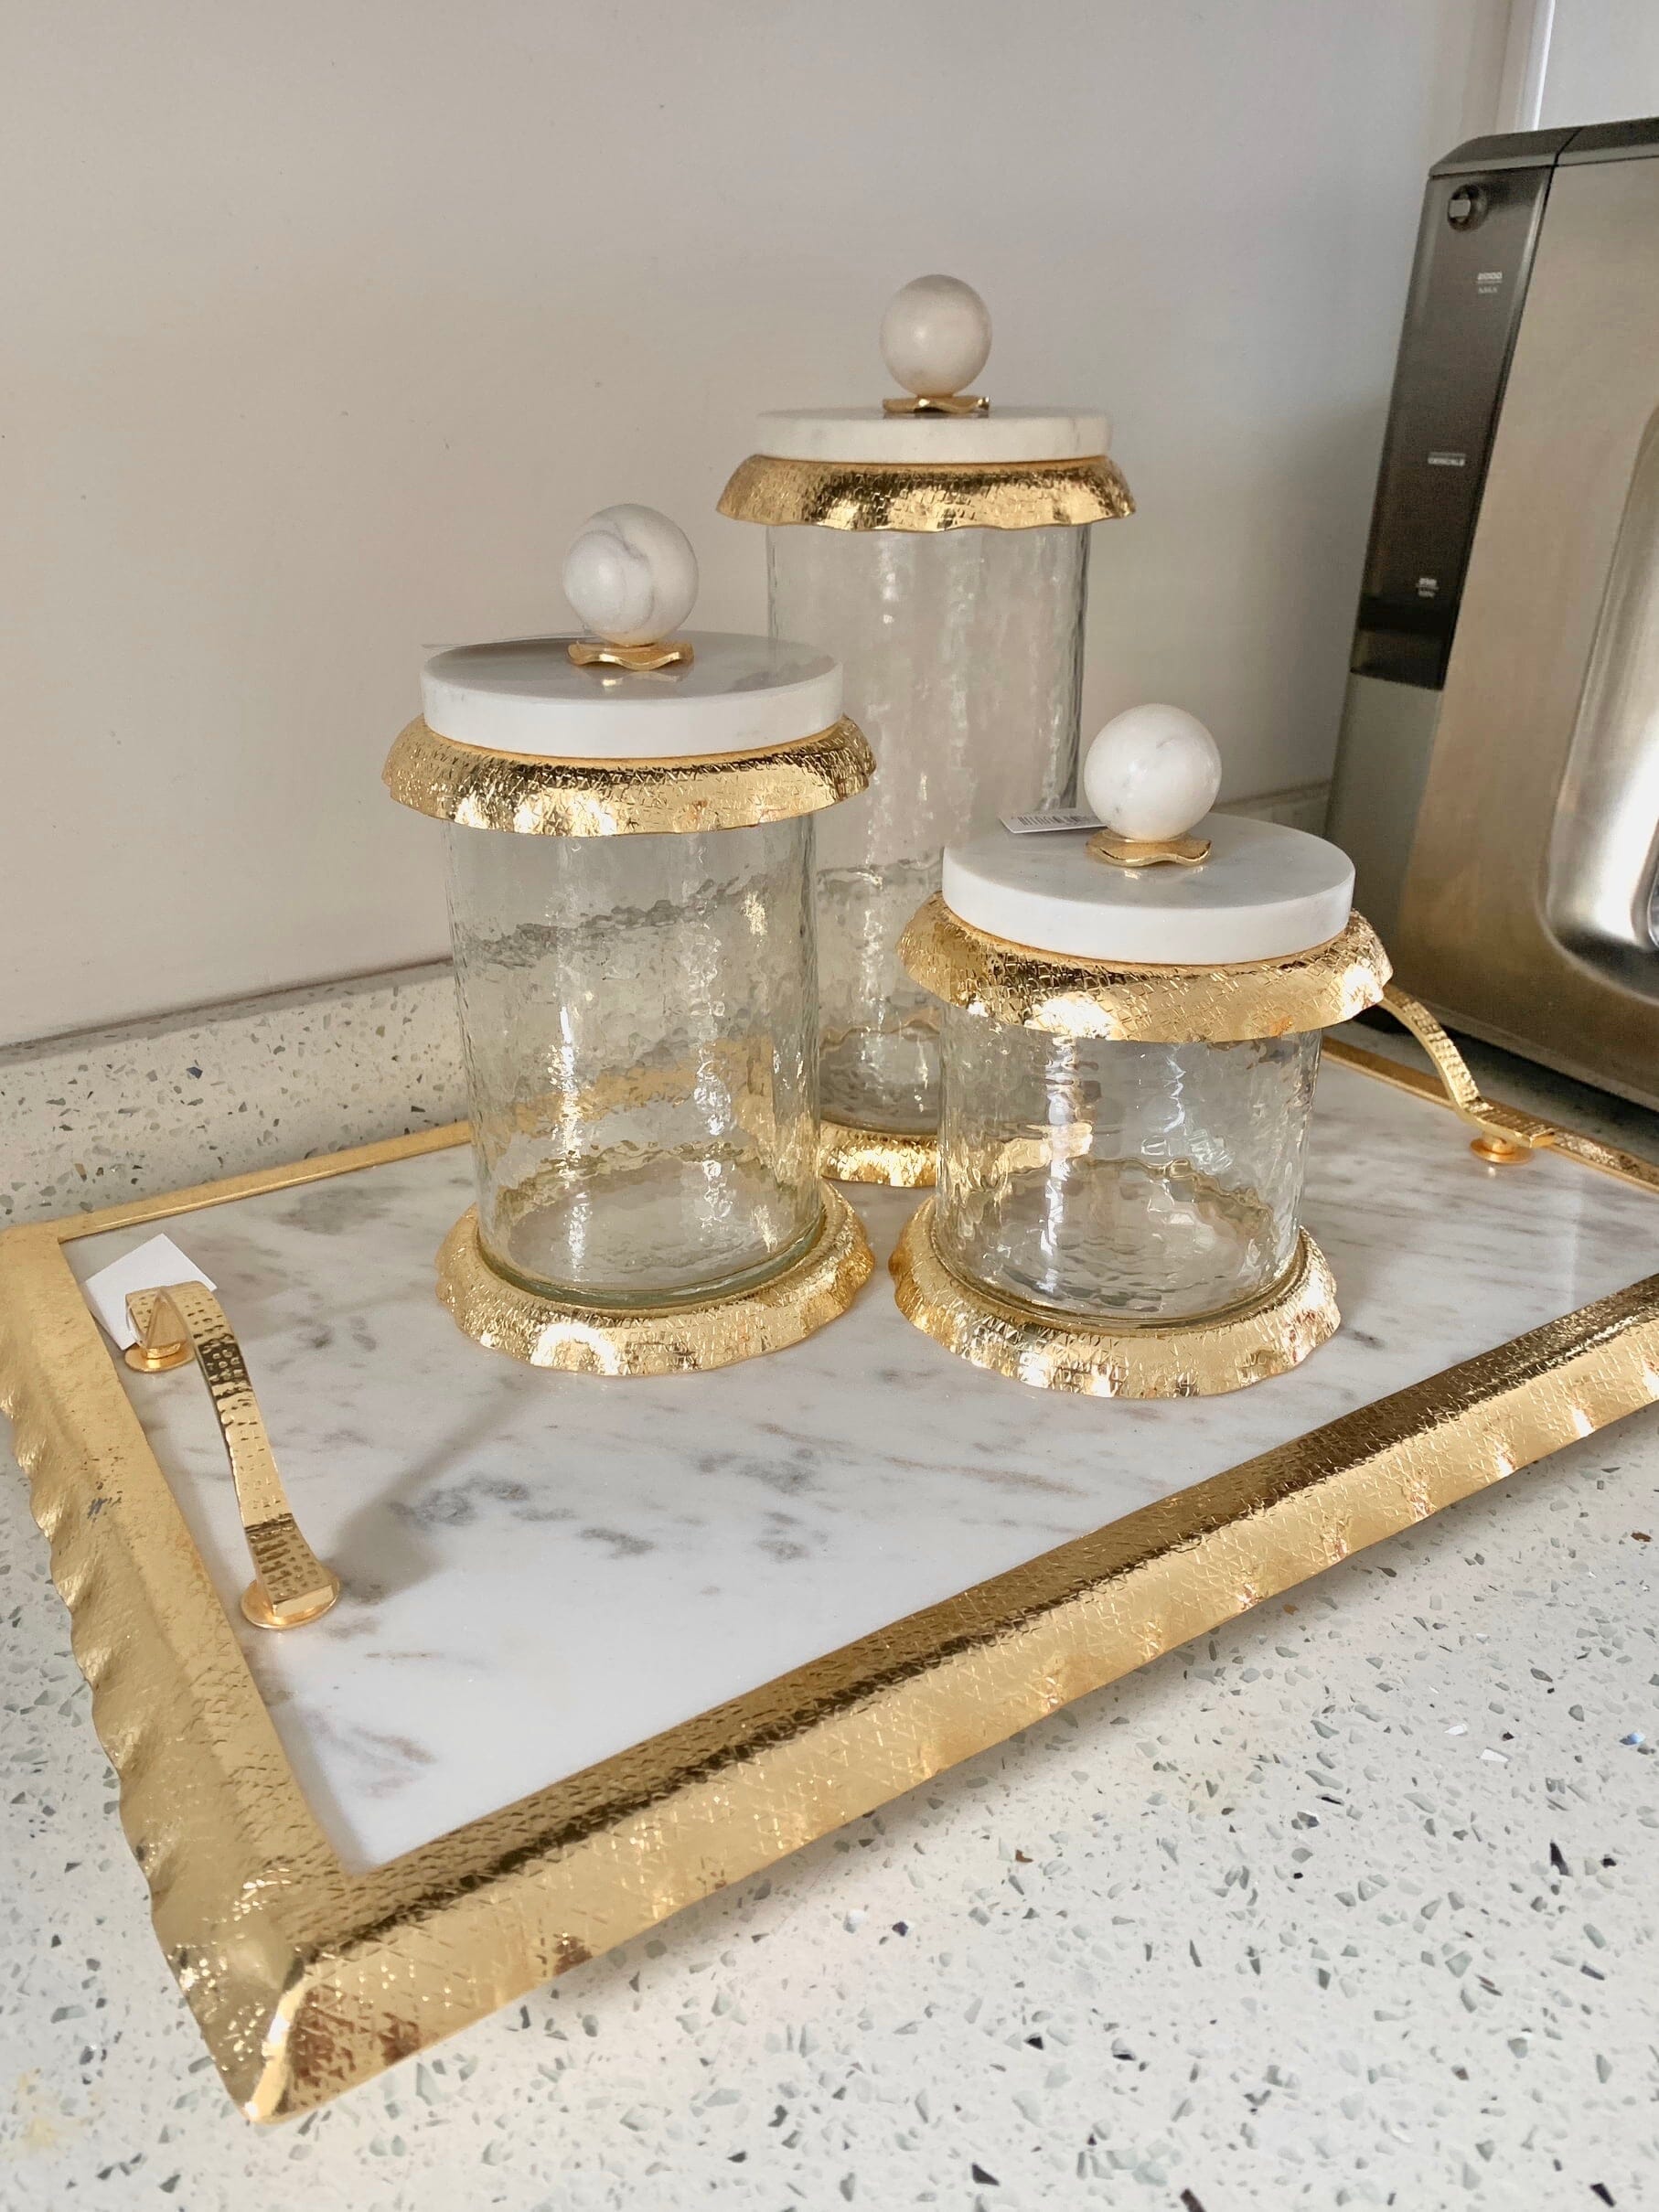 Marble Kitchen Tray Gold Ruffle Design Decorative Trays High Class Touch - Home Decor 